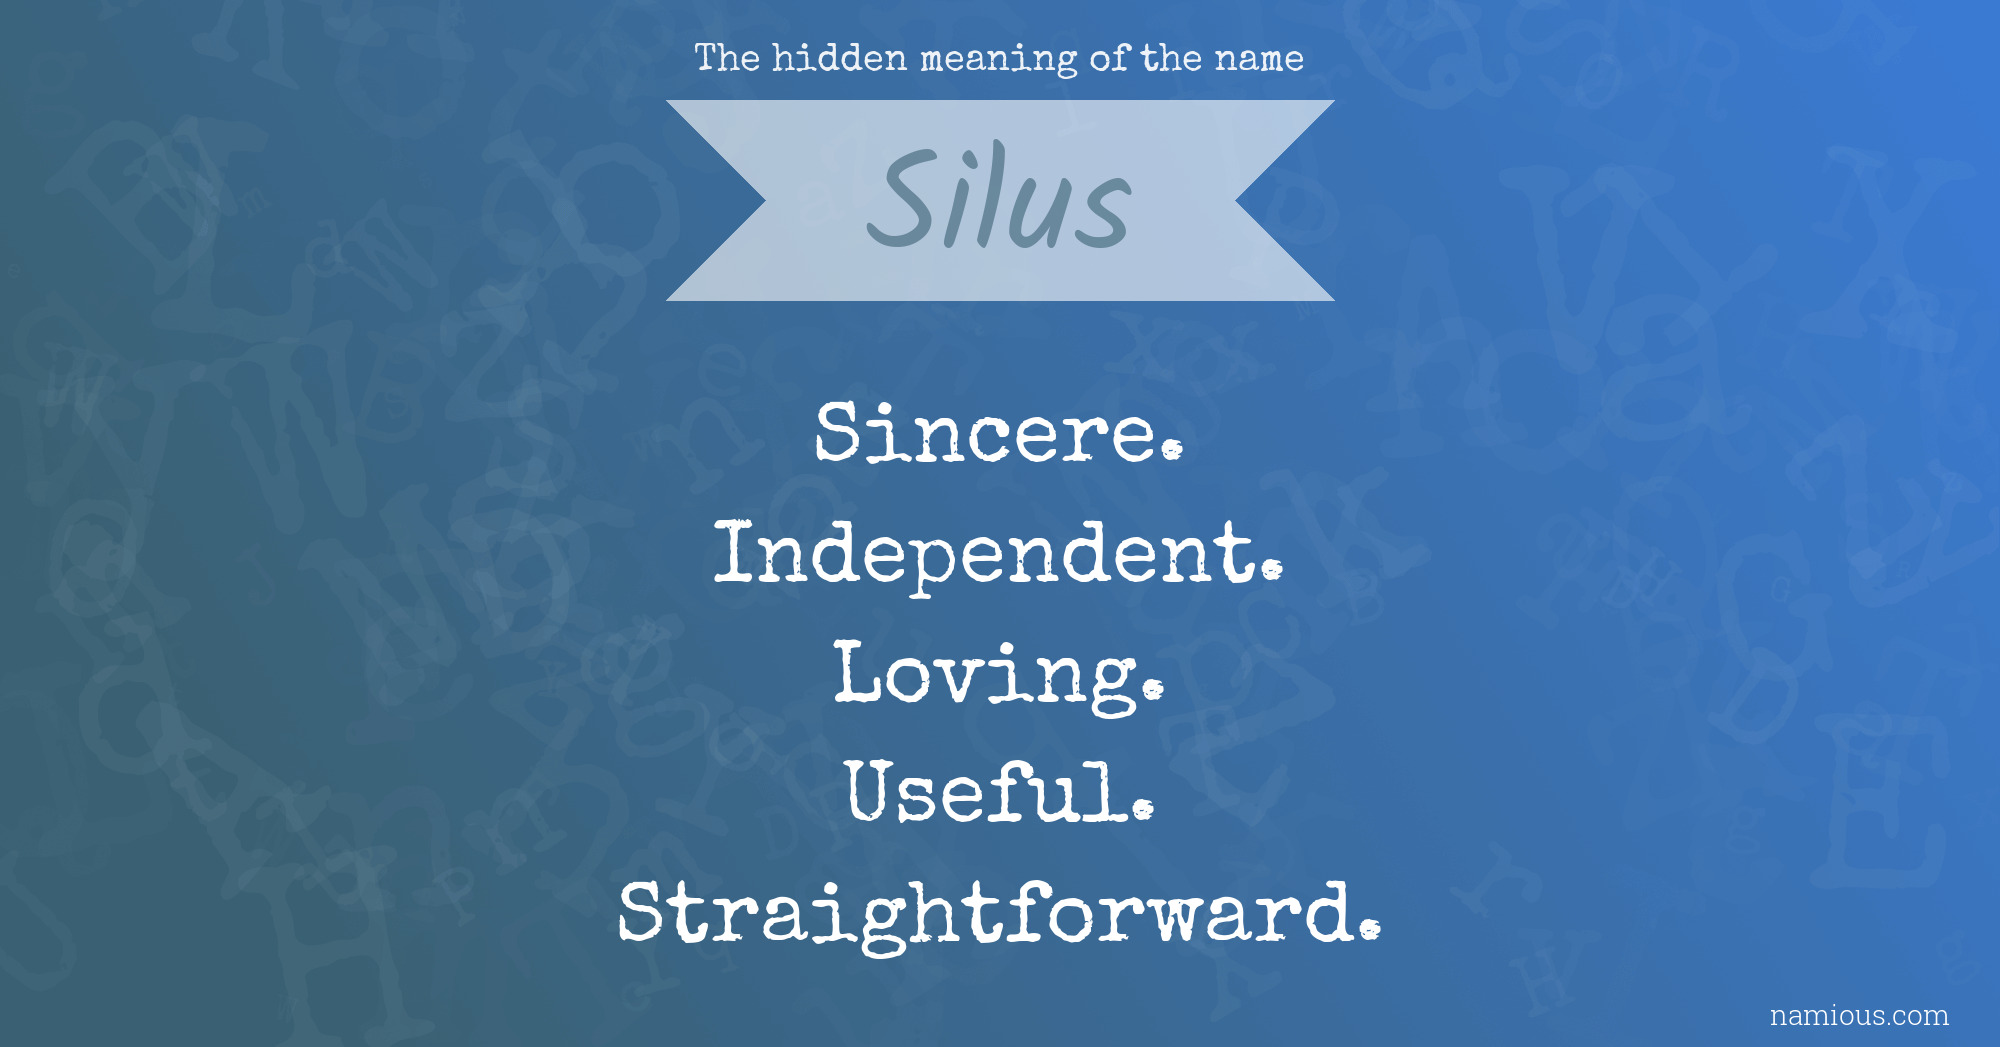 The hidden meaning of the name Silus